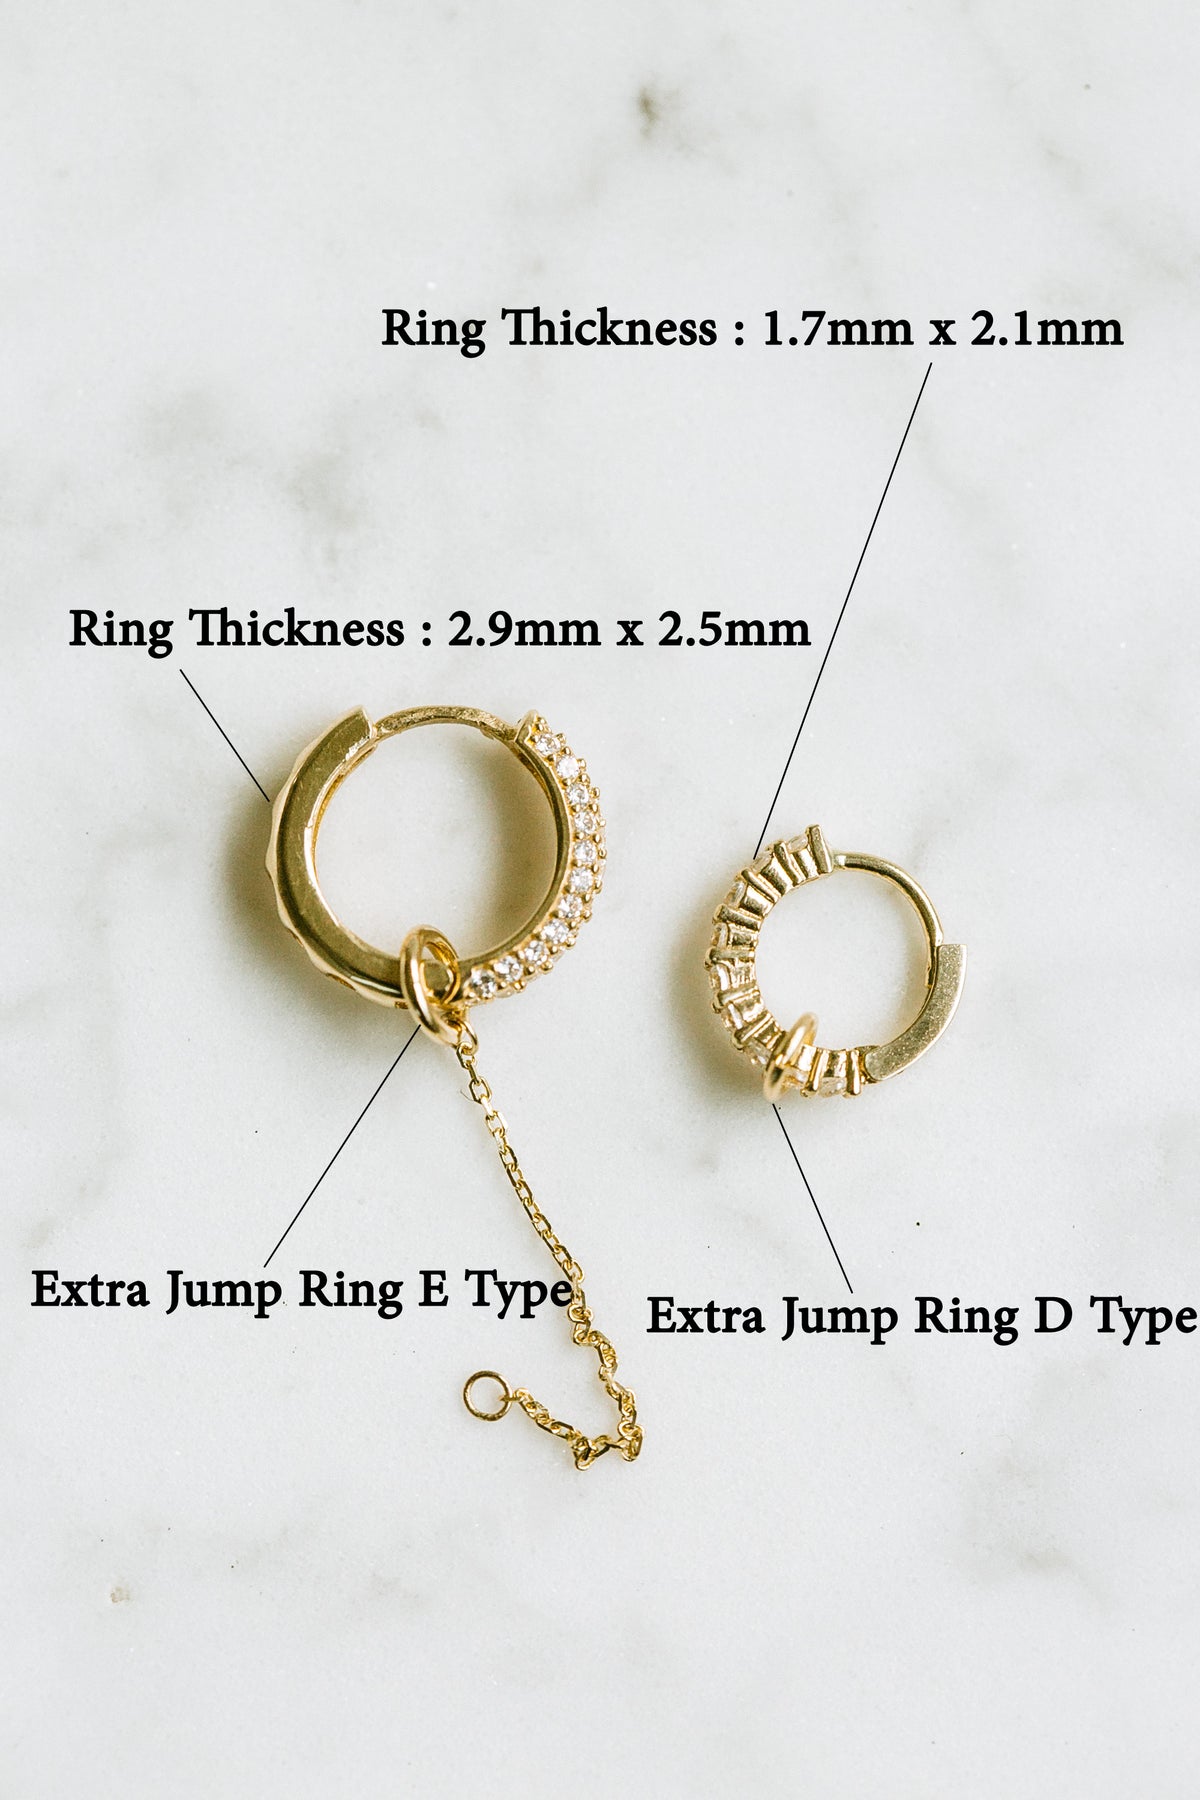  4-14K Yellow Gold Filled Round Magnetic Clasps with Spring Ring  for Necklaces, Bracelets, and Anklets. - Jewelry by Sweetpea